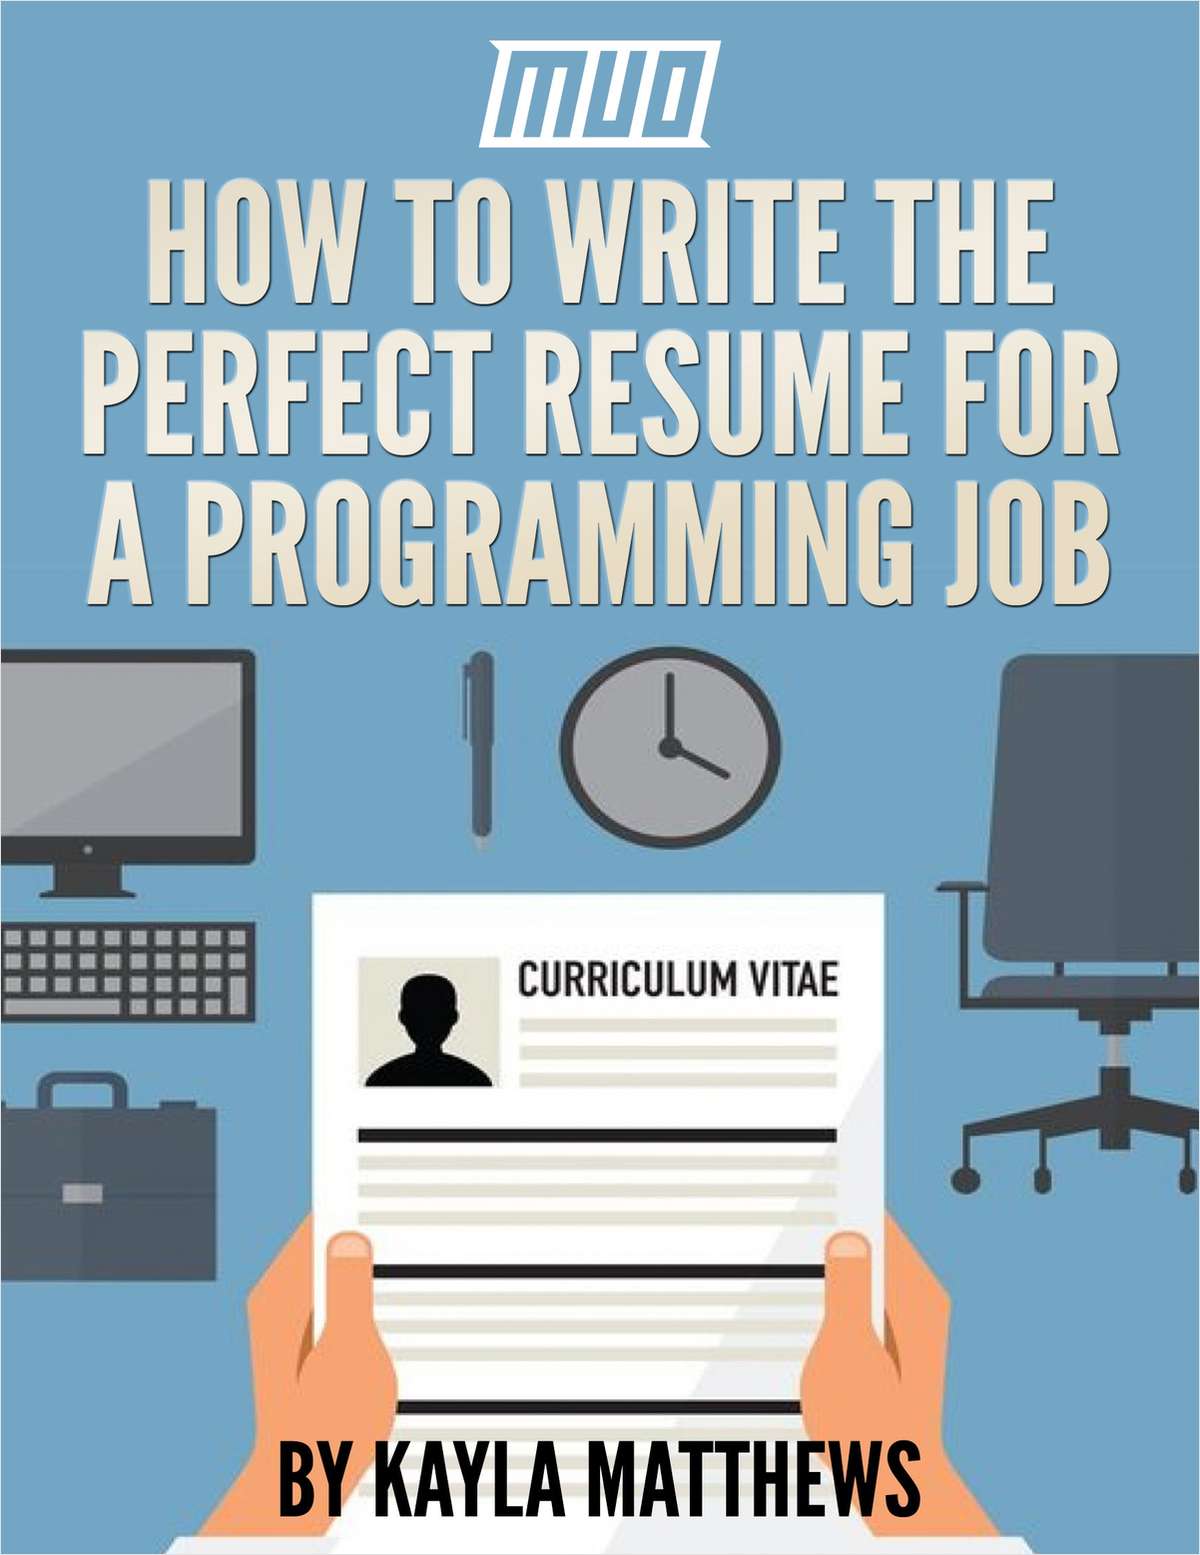 How to Write the Perfect Resume for a Programming Job